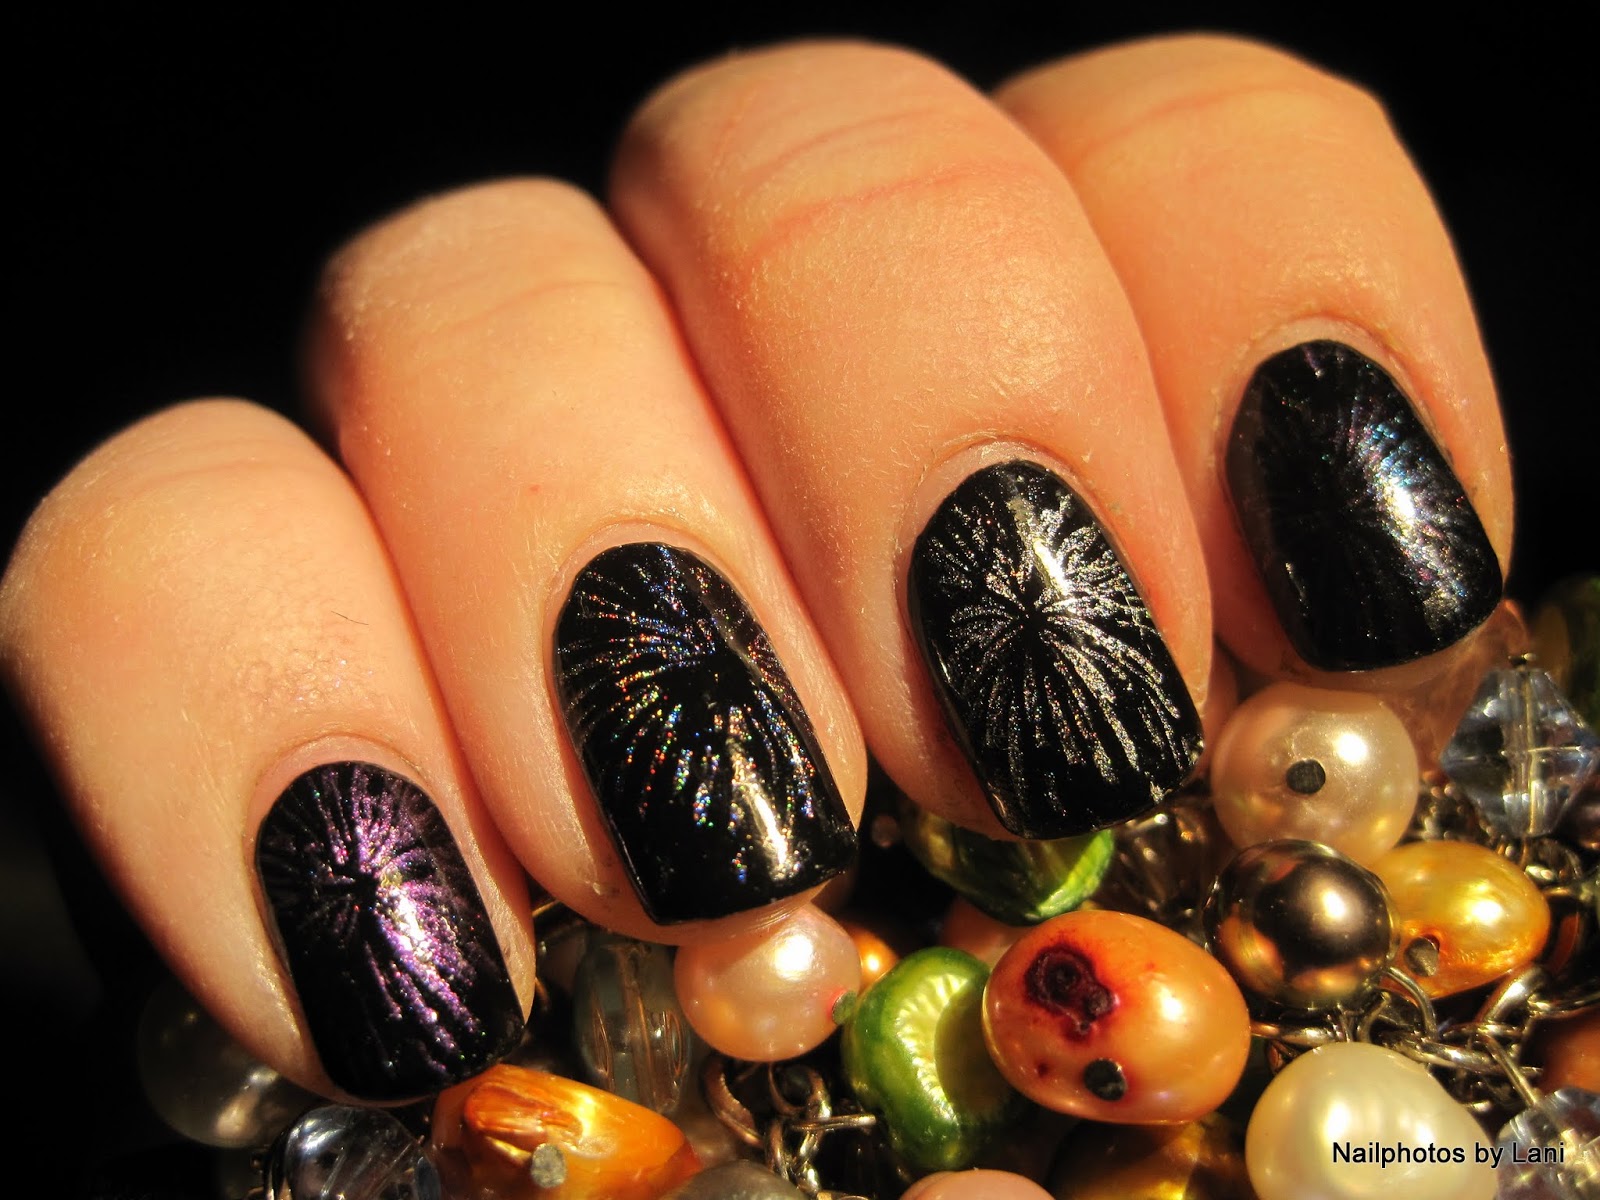 10. New Year's Eve Nail Art Ideas - wide 3